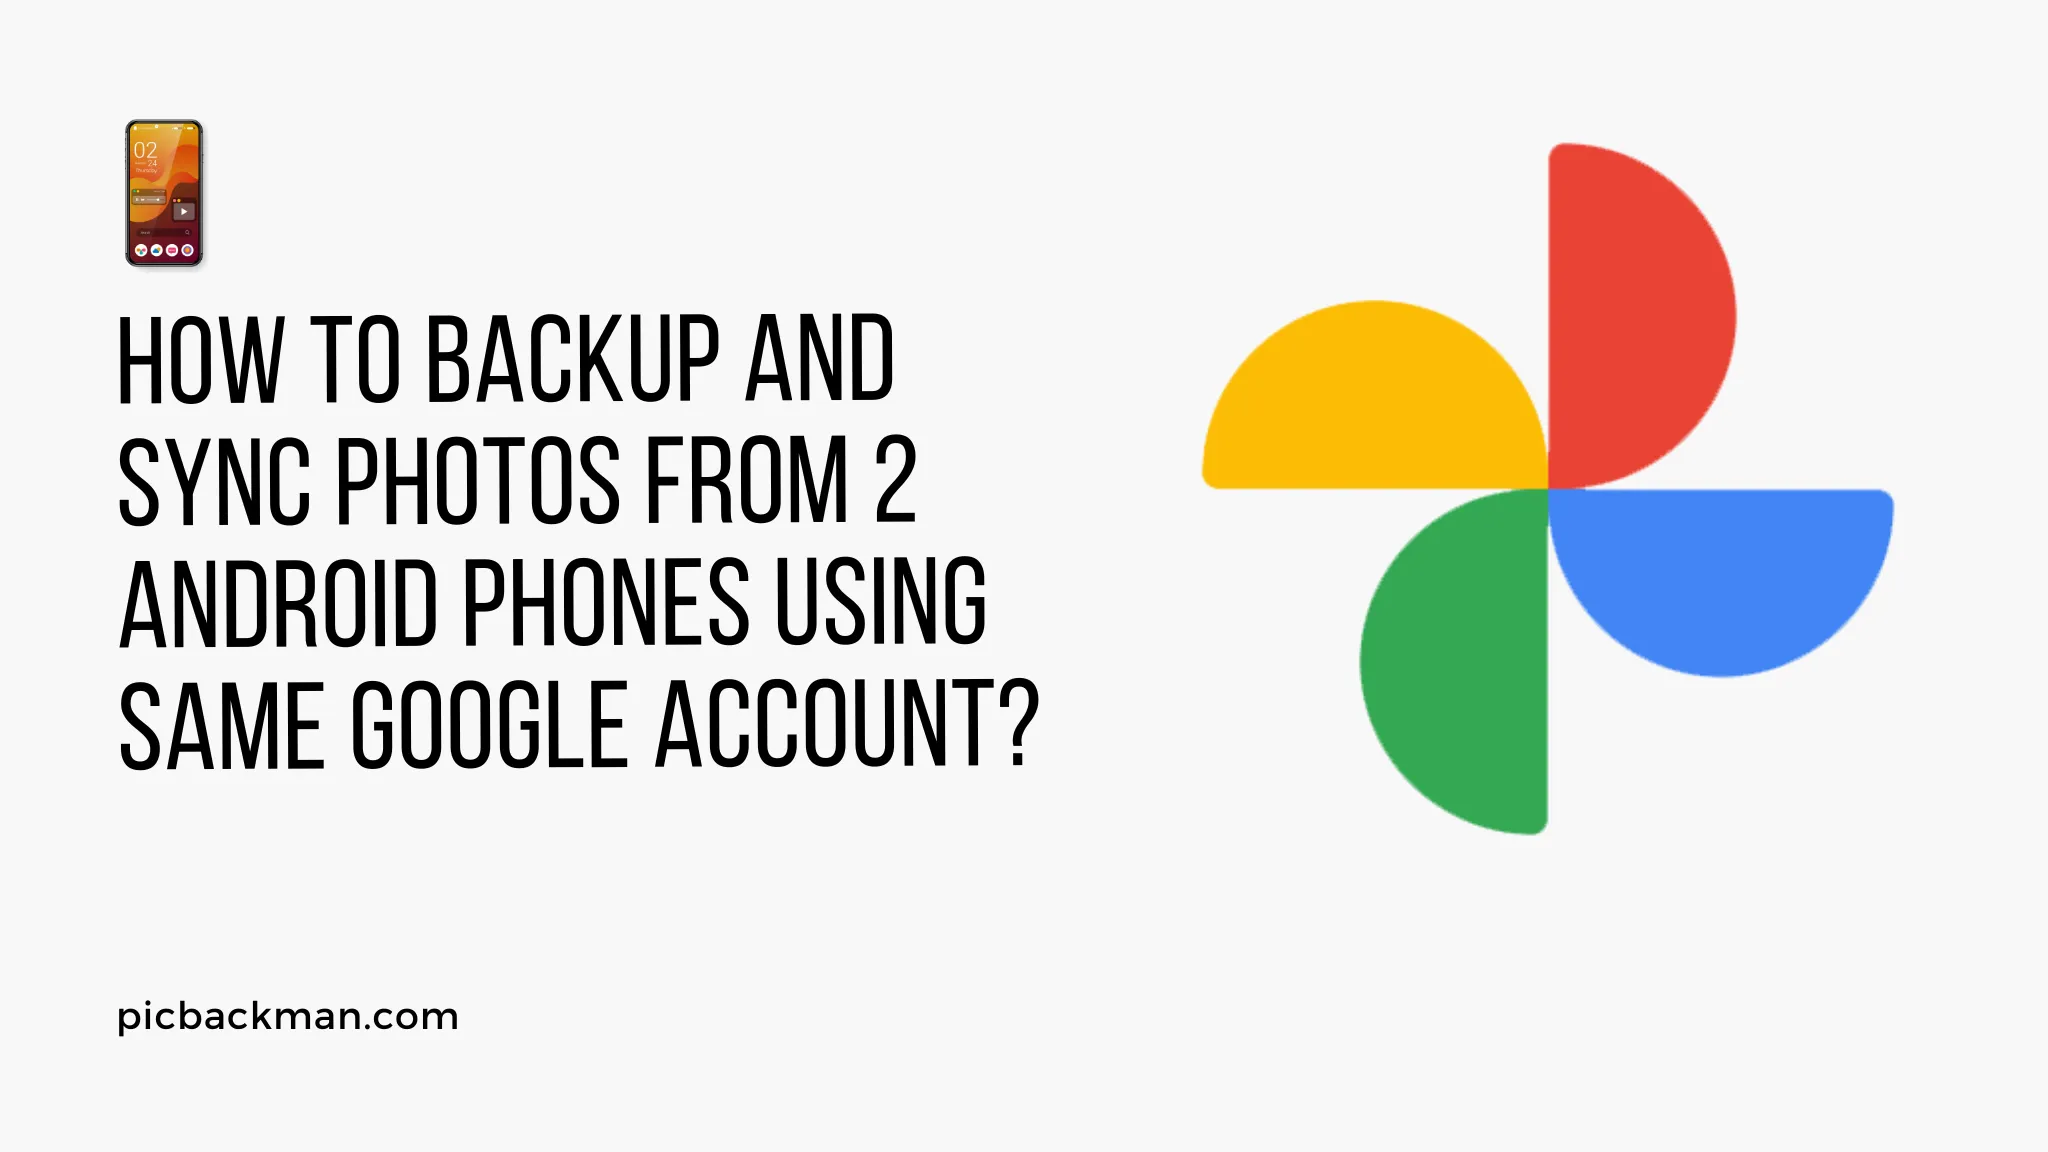 How to Backup and Sync Photos from 2 Android Phones using Same Google Account